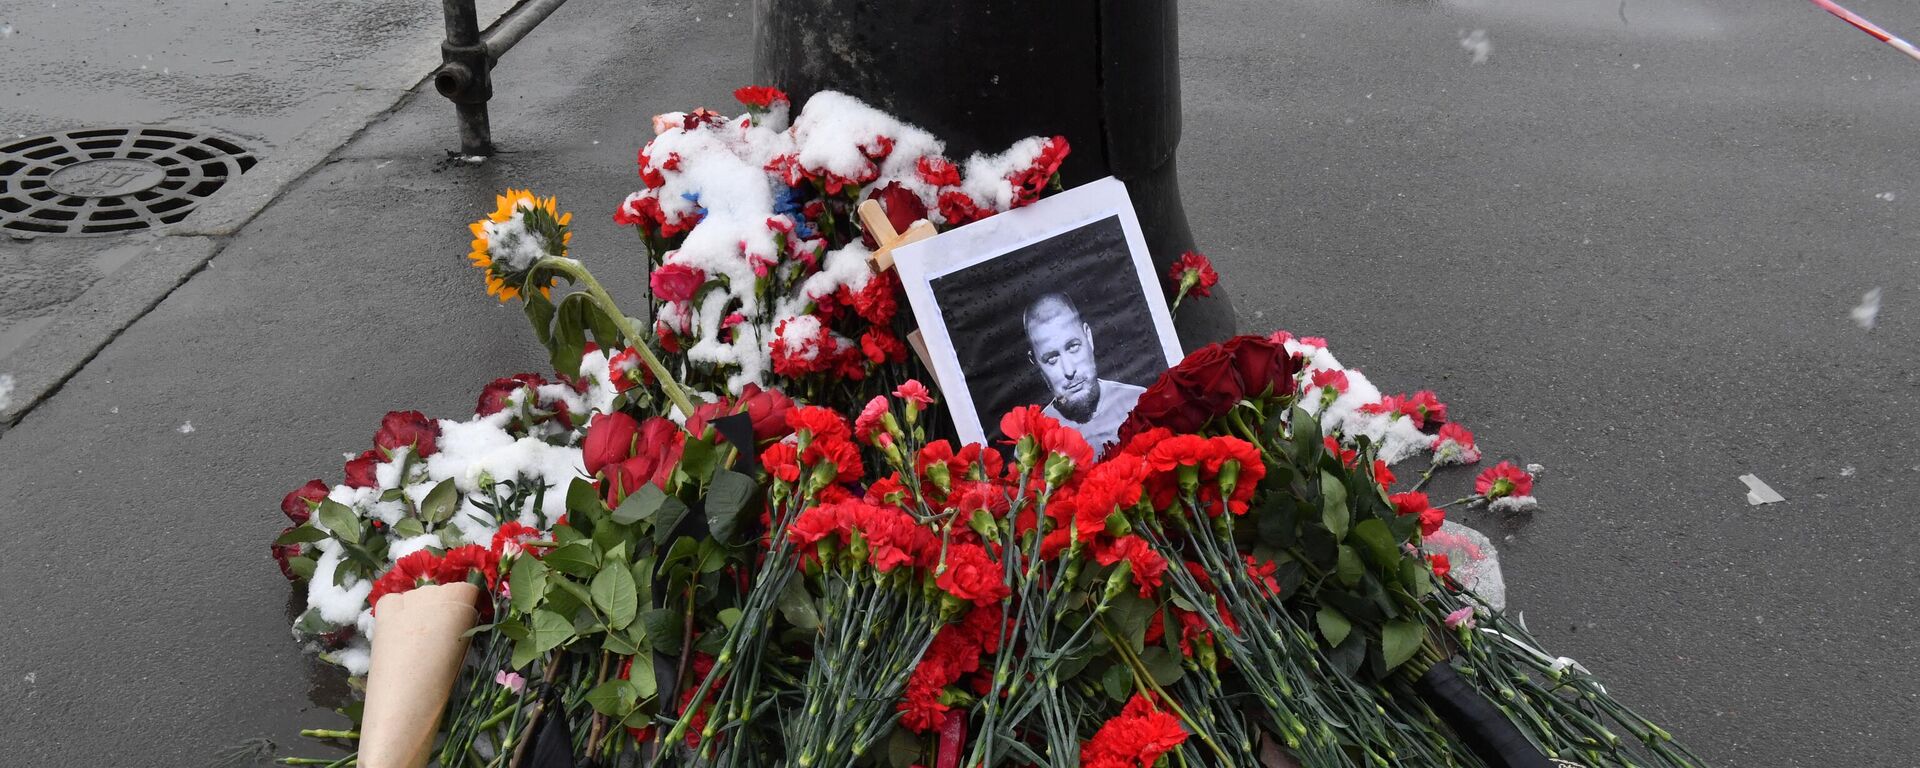 A portrait of Russian military blogger Vladlen Tatarsky, whose real name is Maxim Fomin, who was killed in the April 2 bomb blast in a cafe, is seen among flowers at a makeshift memorial by the explosion site in Saint Petersburg on April 3, 2023.  - Sputnik International, 1920, 03.04.2023